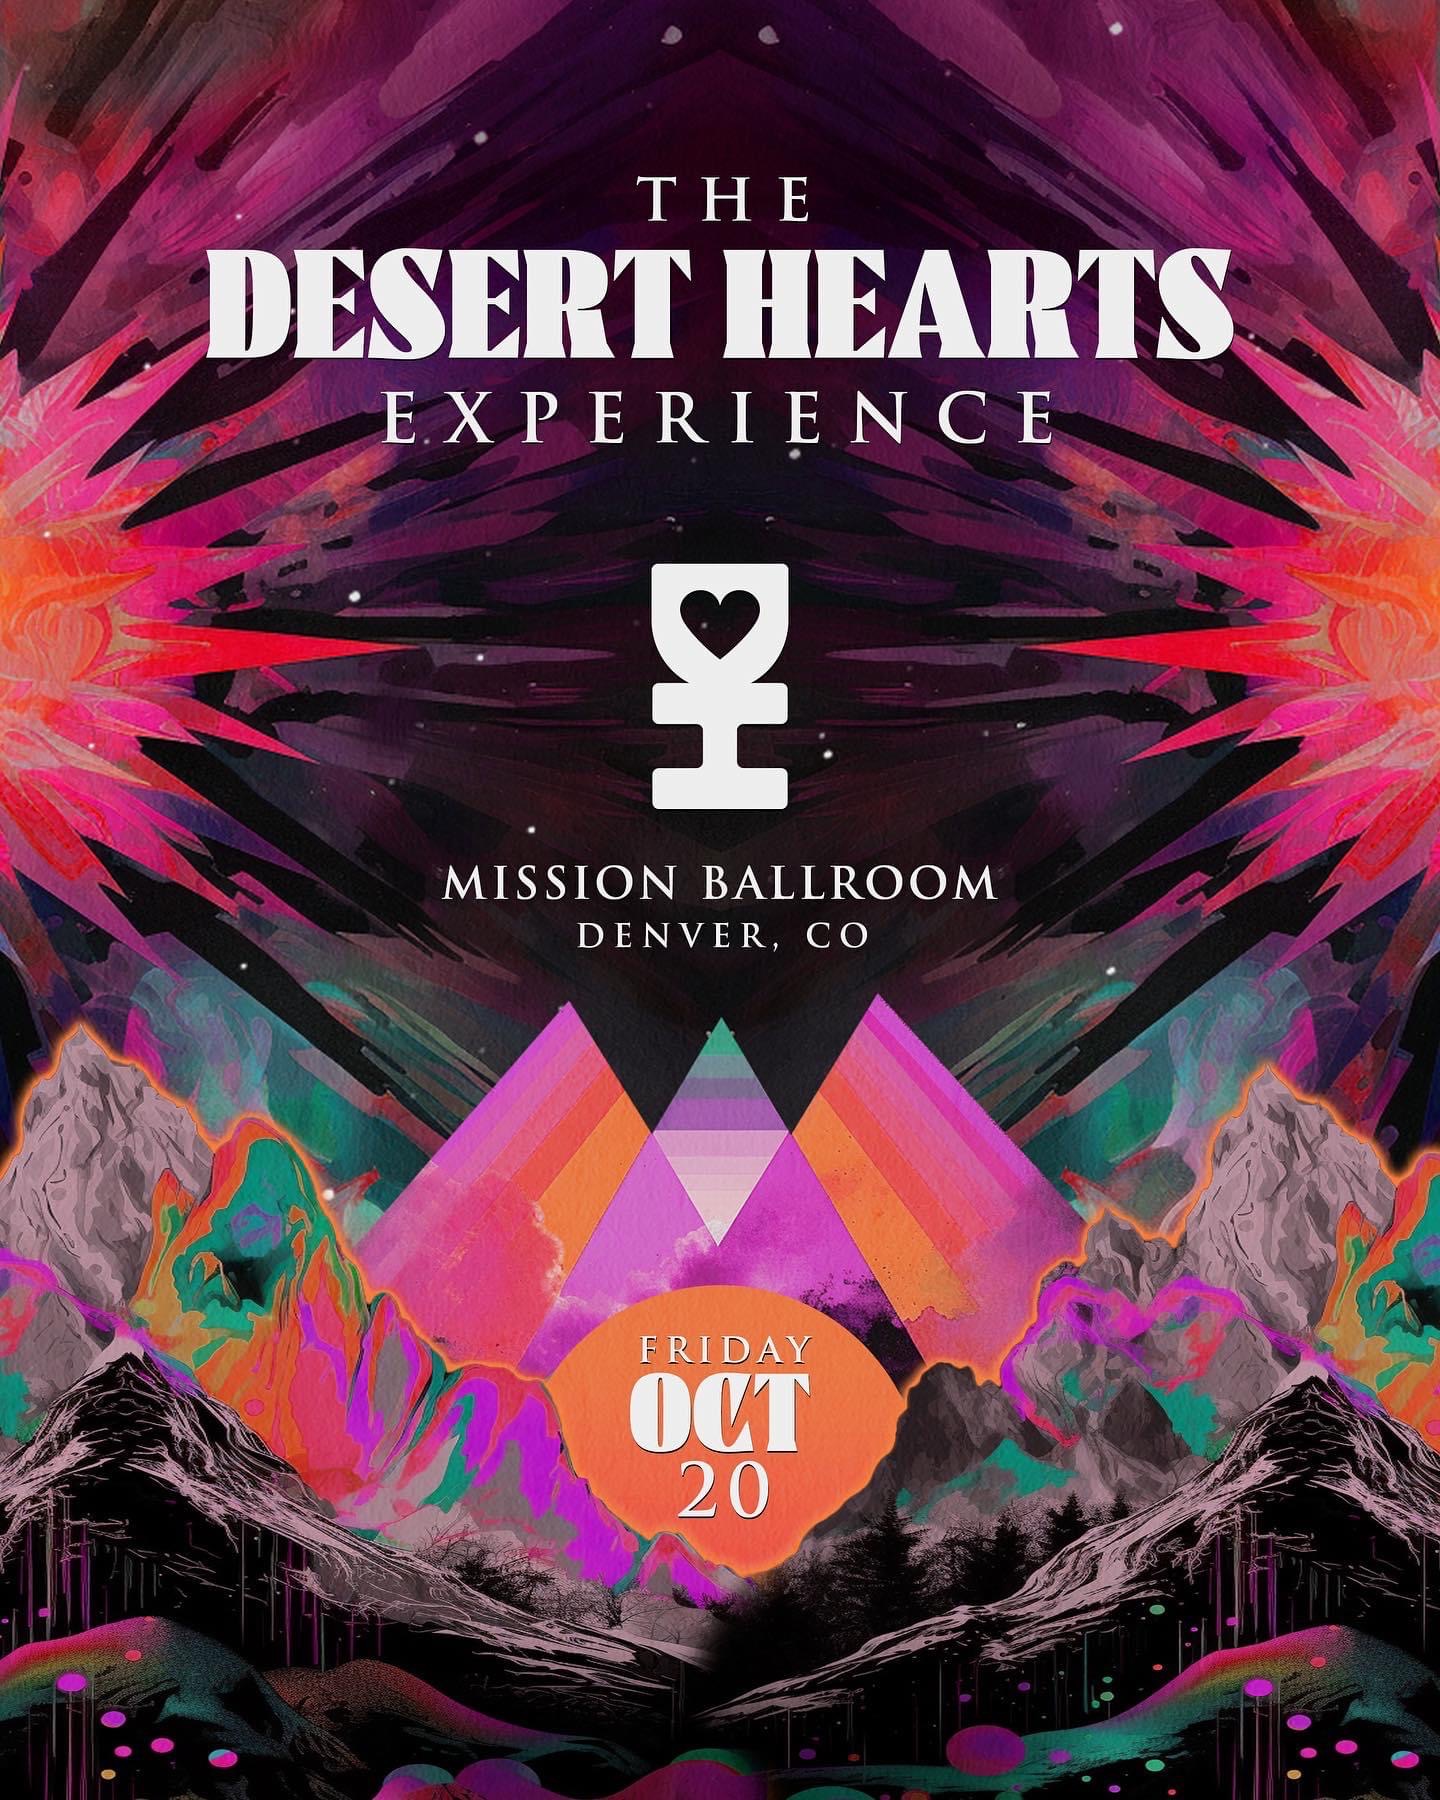 The Desert Hearts Experience